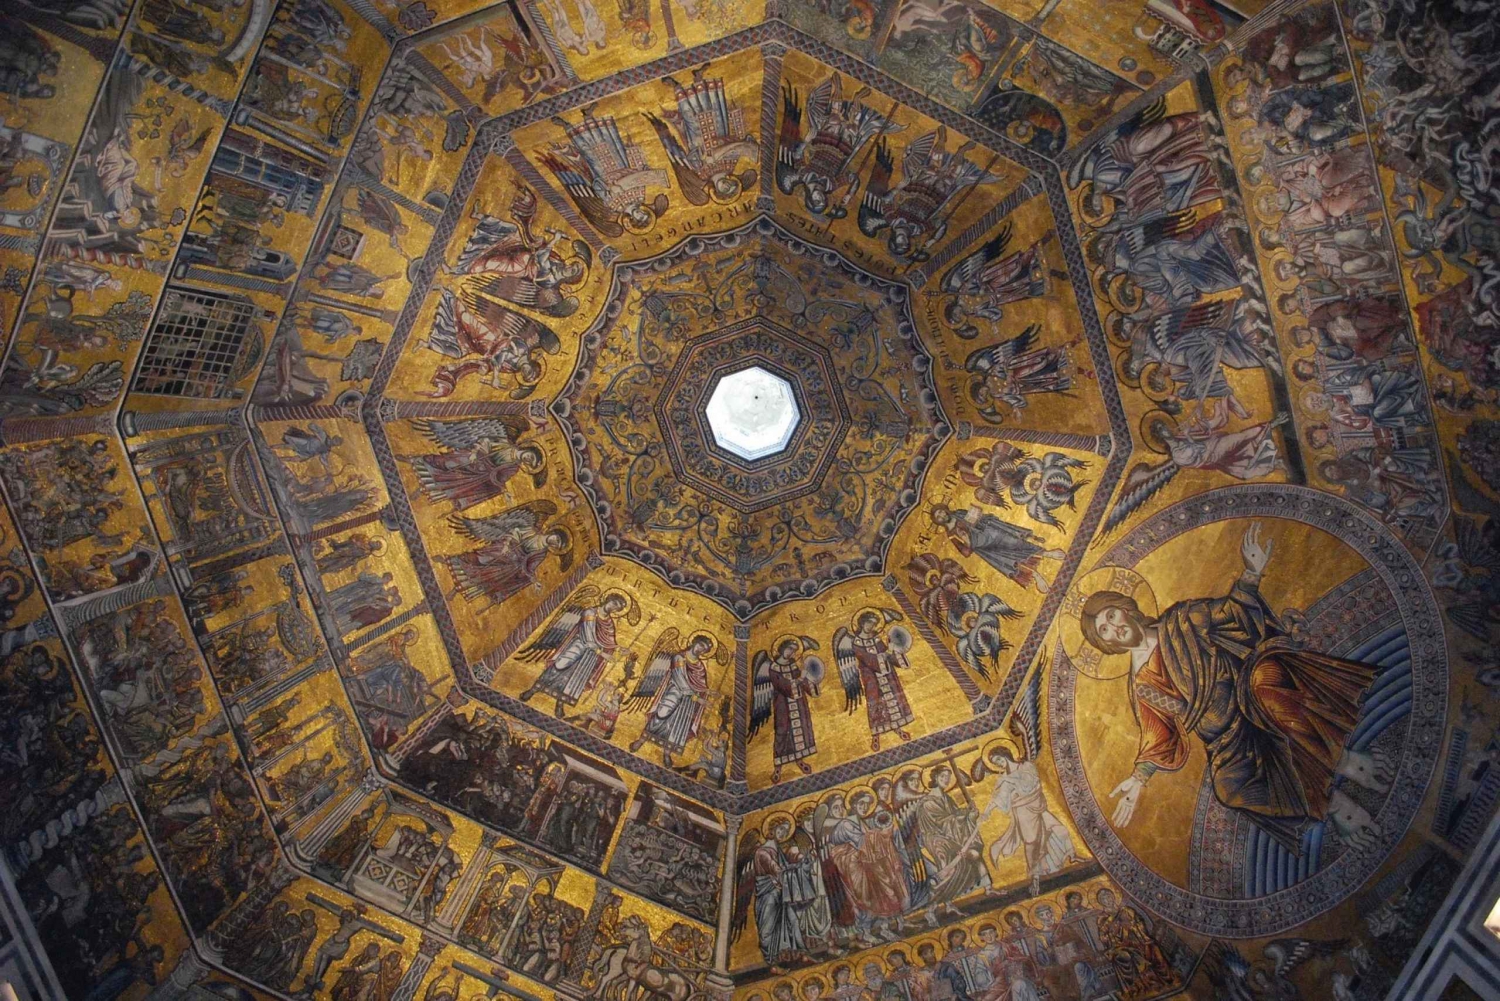 Florence: Skip-the-Line Doumo Cathedral Guided Tour